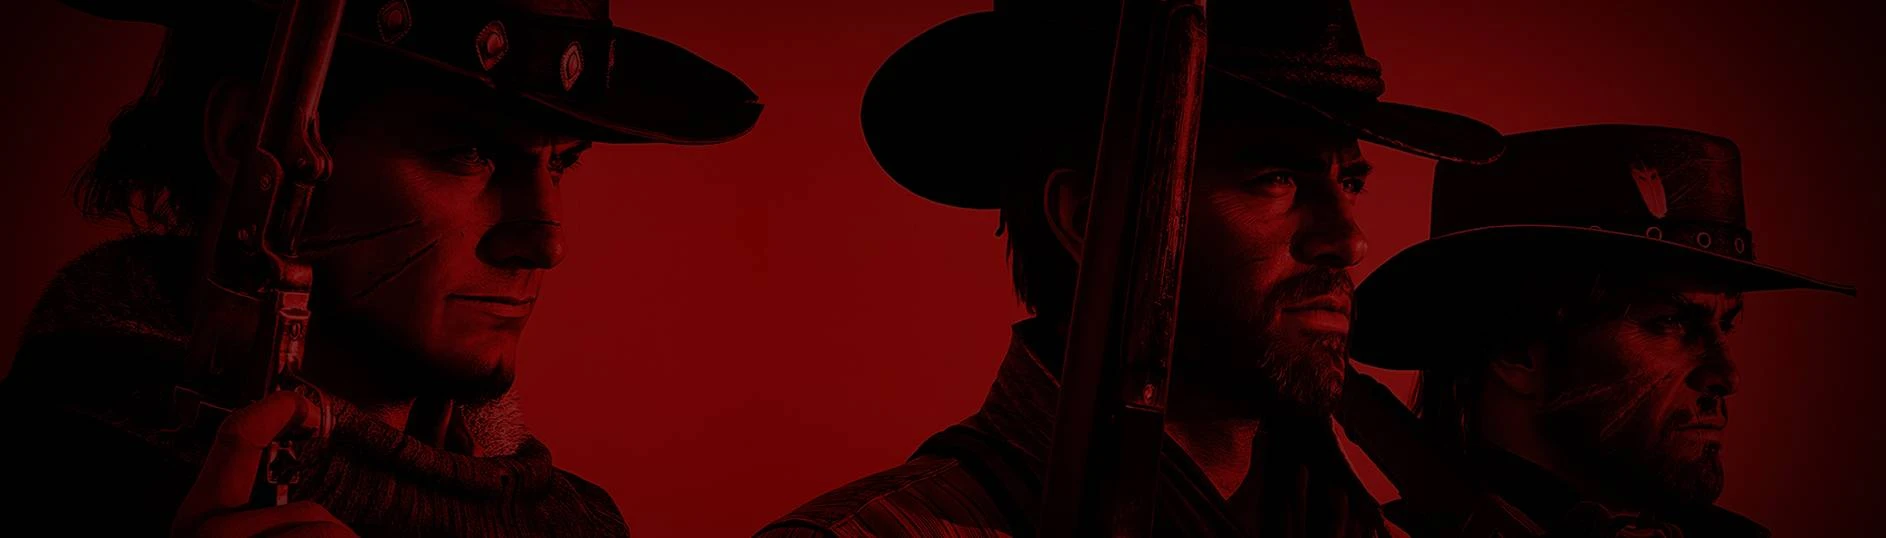 RDO Trailer Graphics at Red Dead Redemption 2 Nexus - Mods and community